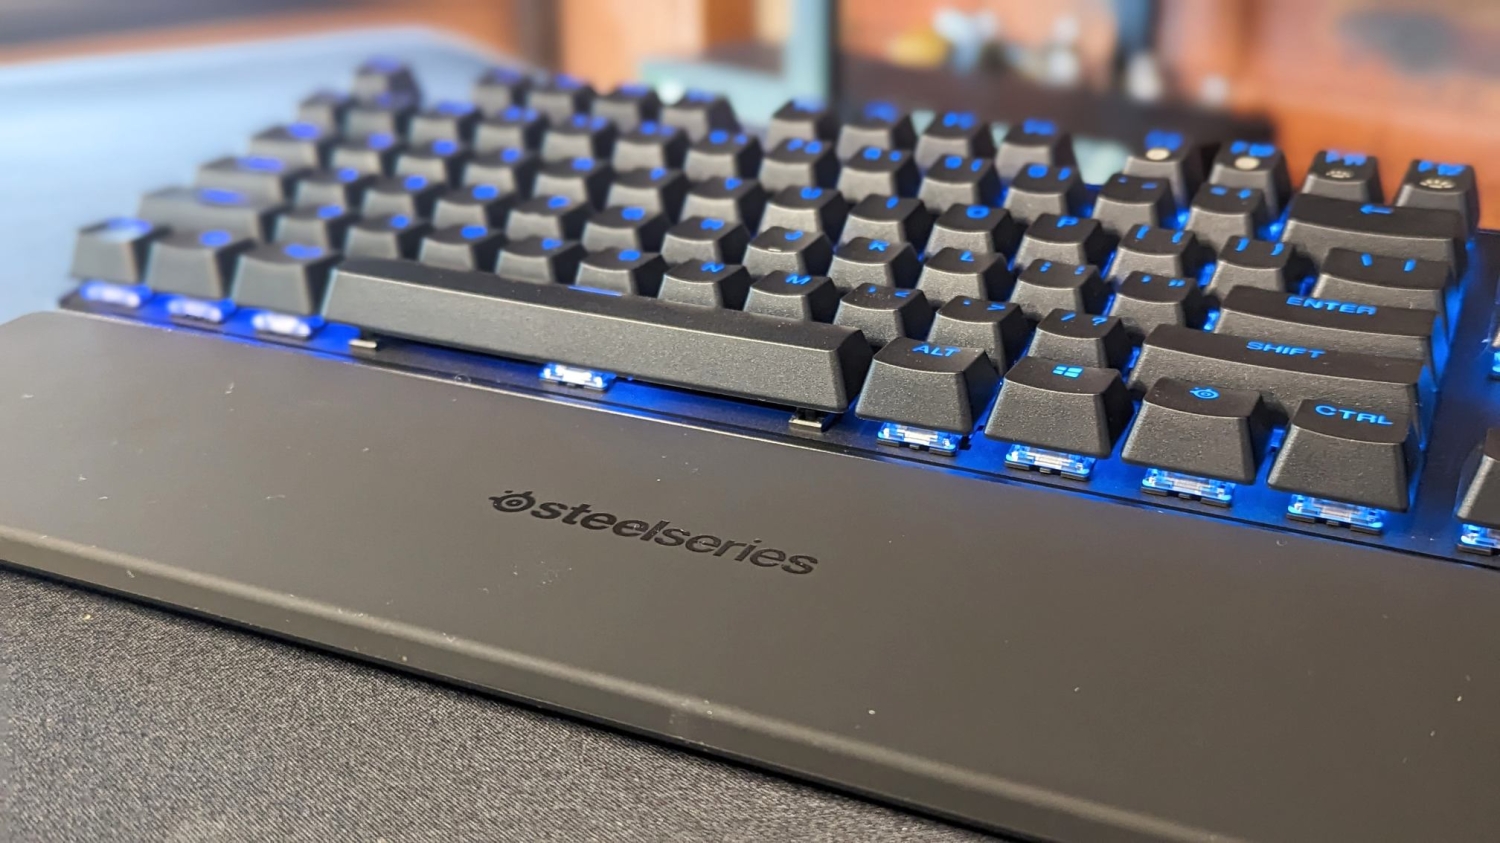 SteelSeries Apex 7 & Apex Pro Review - Software & Performance Testing